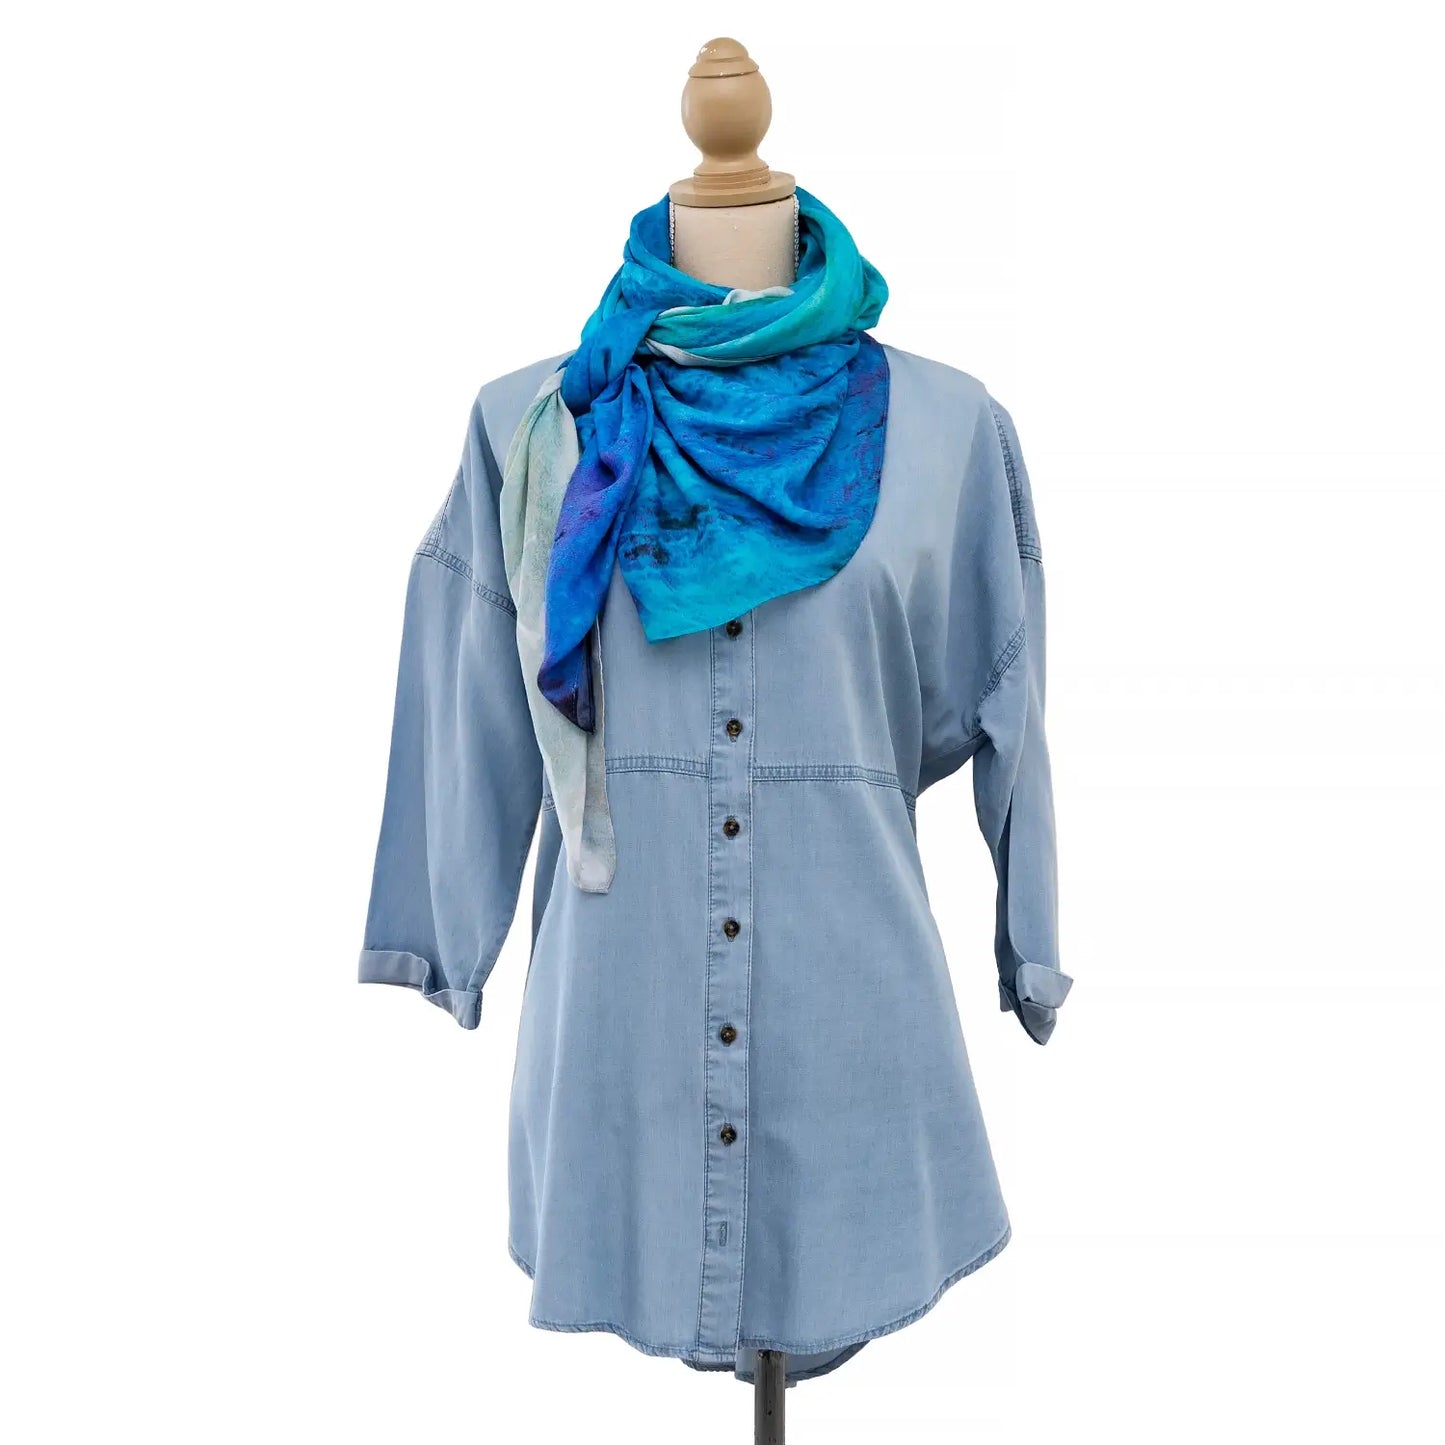 barchetta wearable art square silk scarf by seahorse silks with chambray shirt